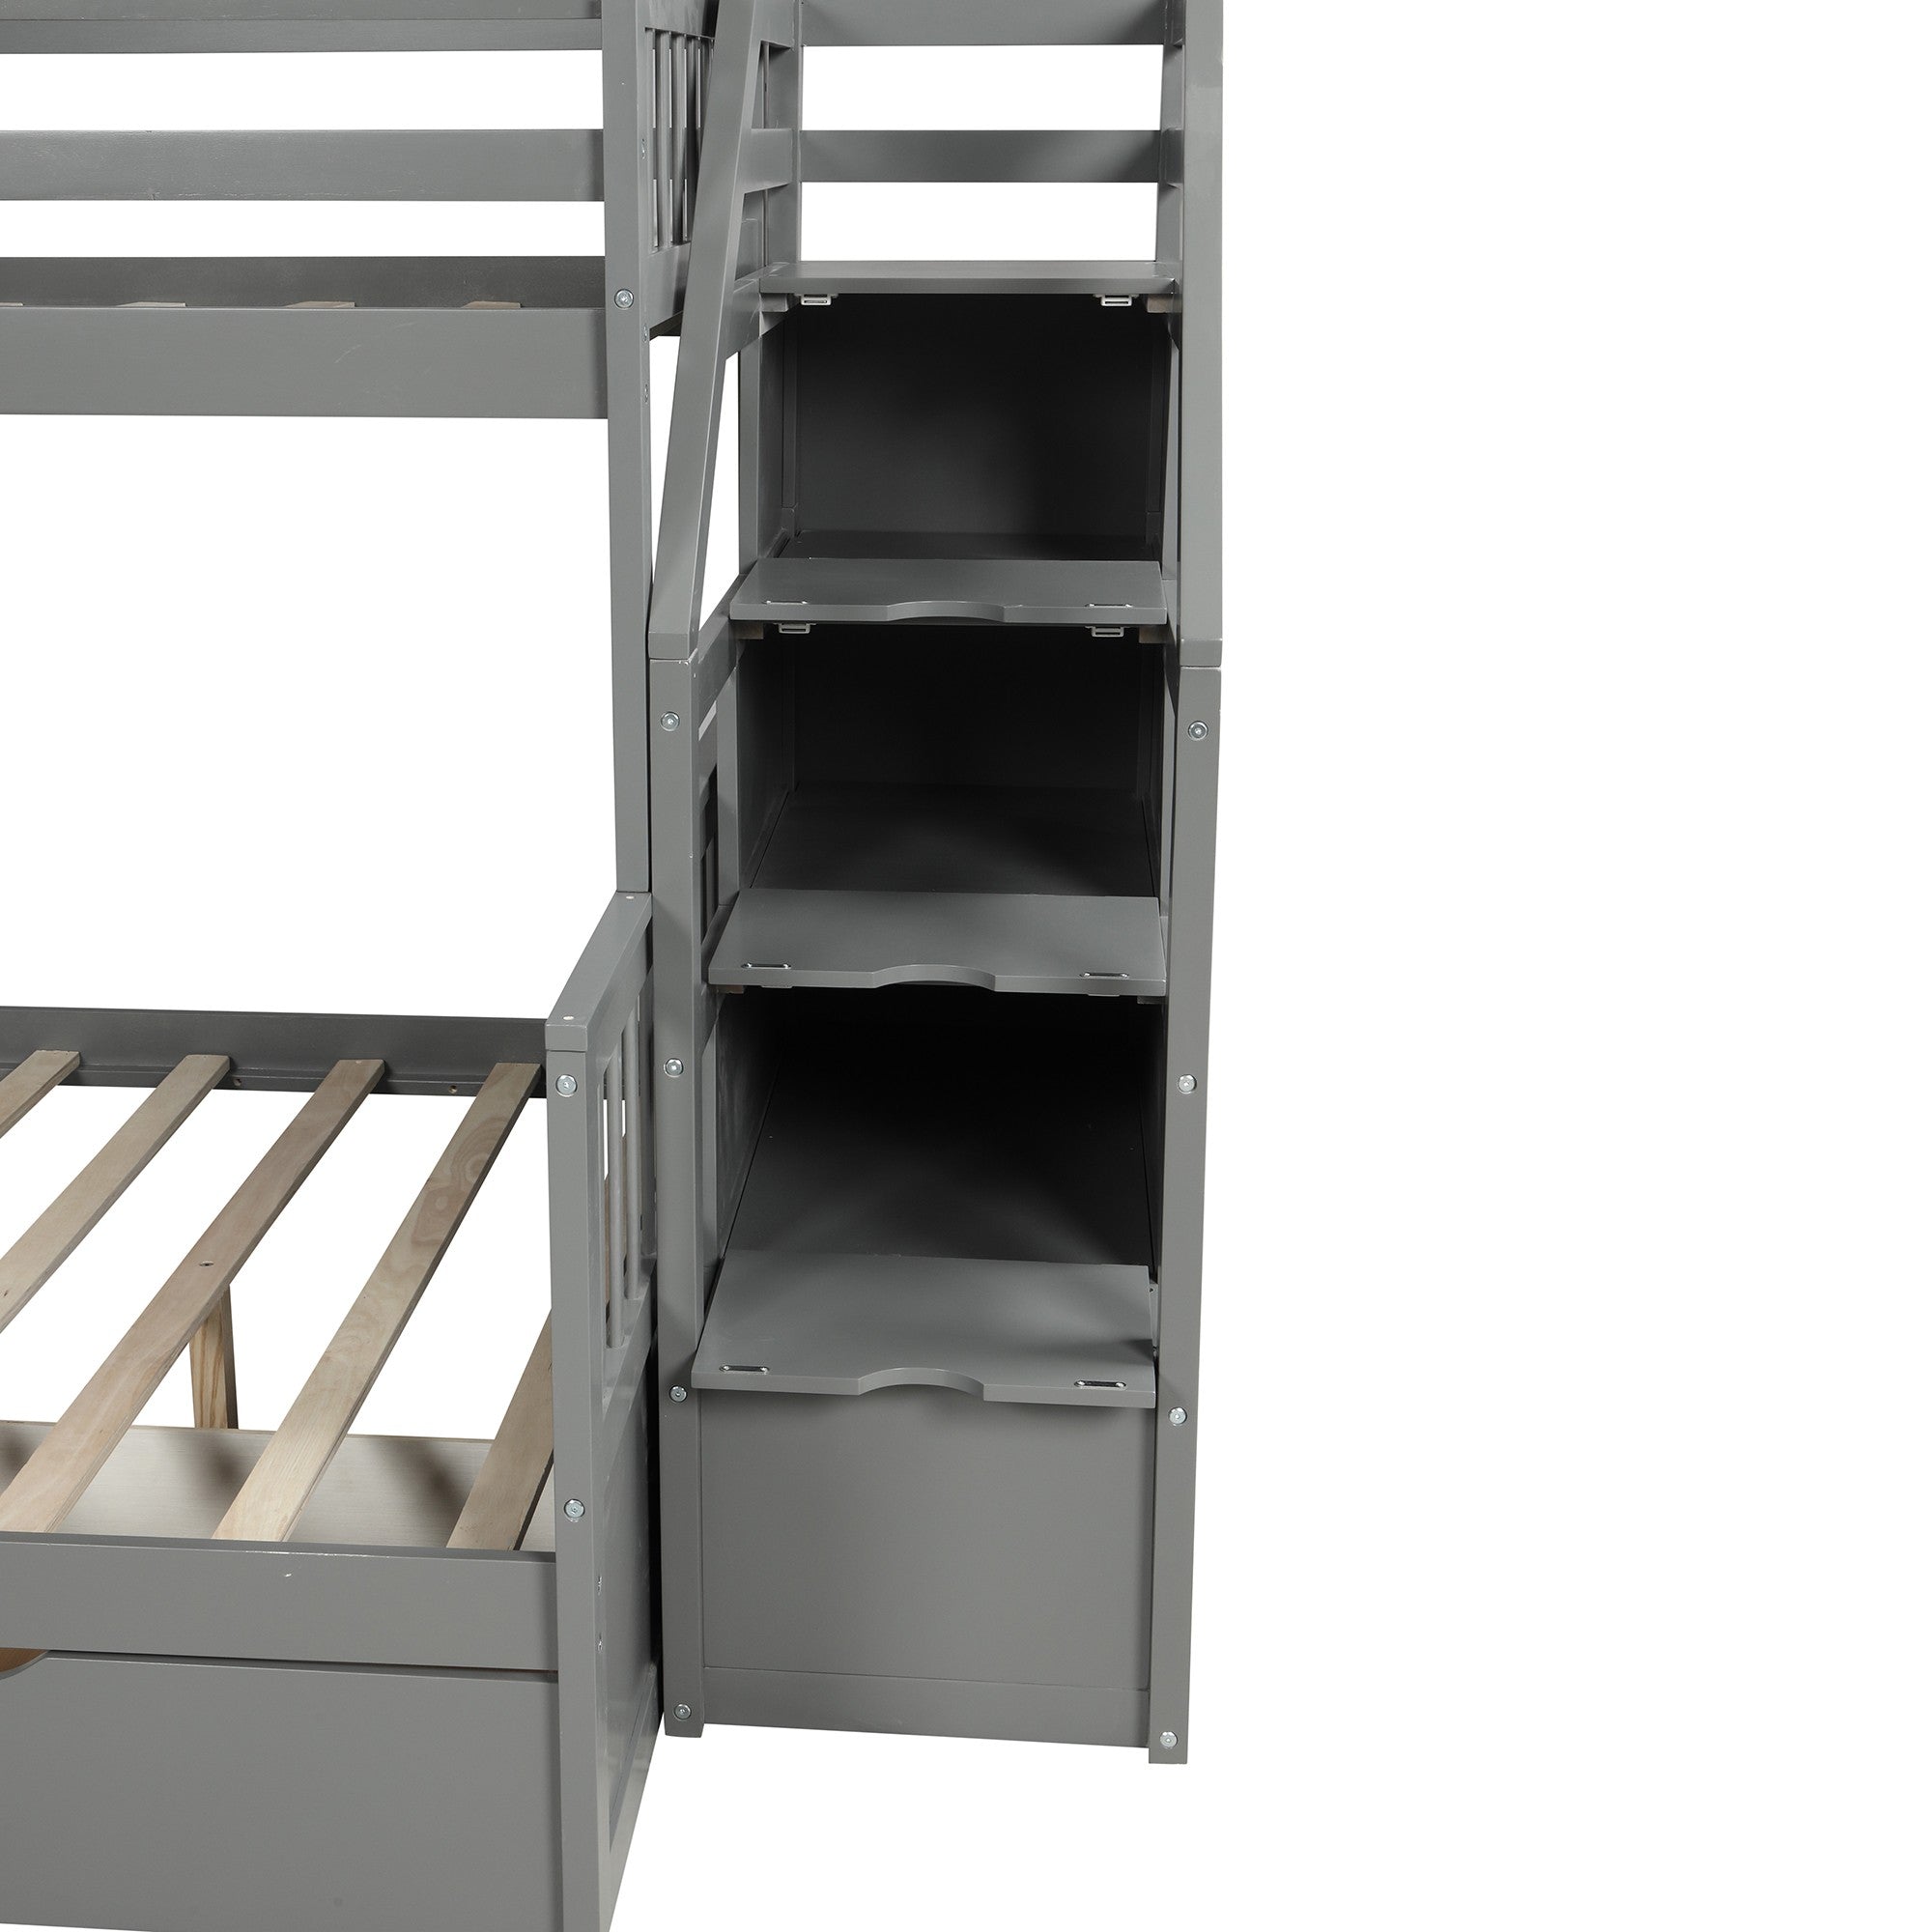 Gray Twin Over Full Bunk Bed with Slide and Storage Default Title